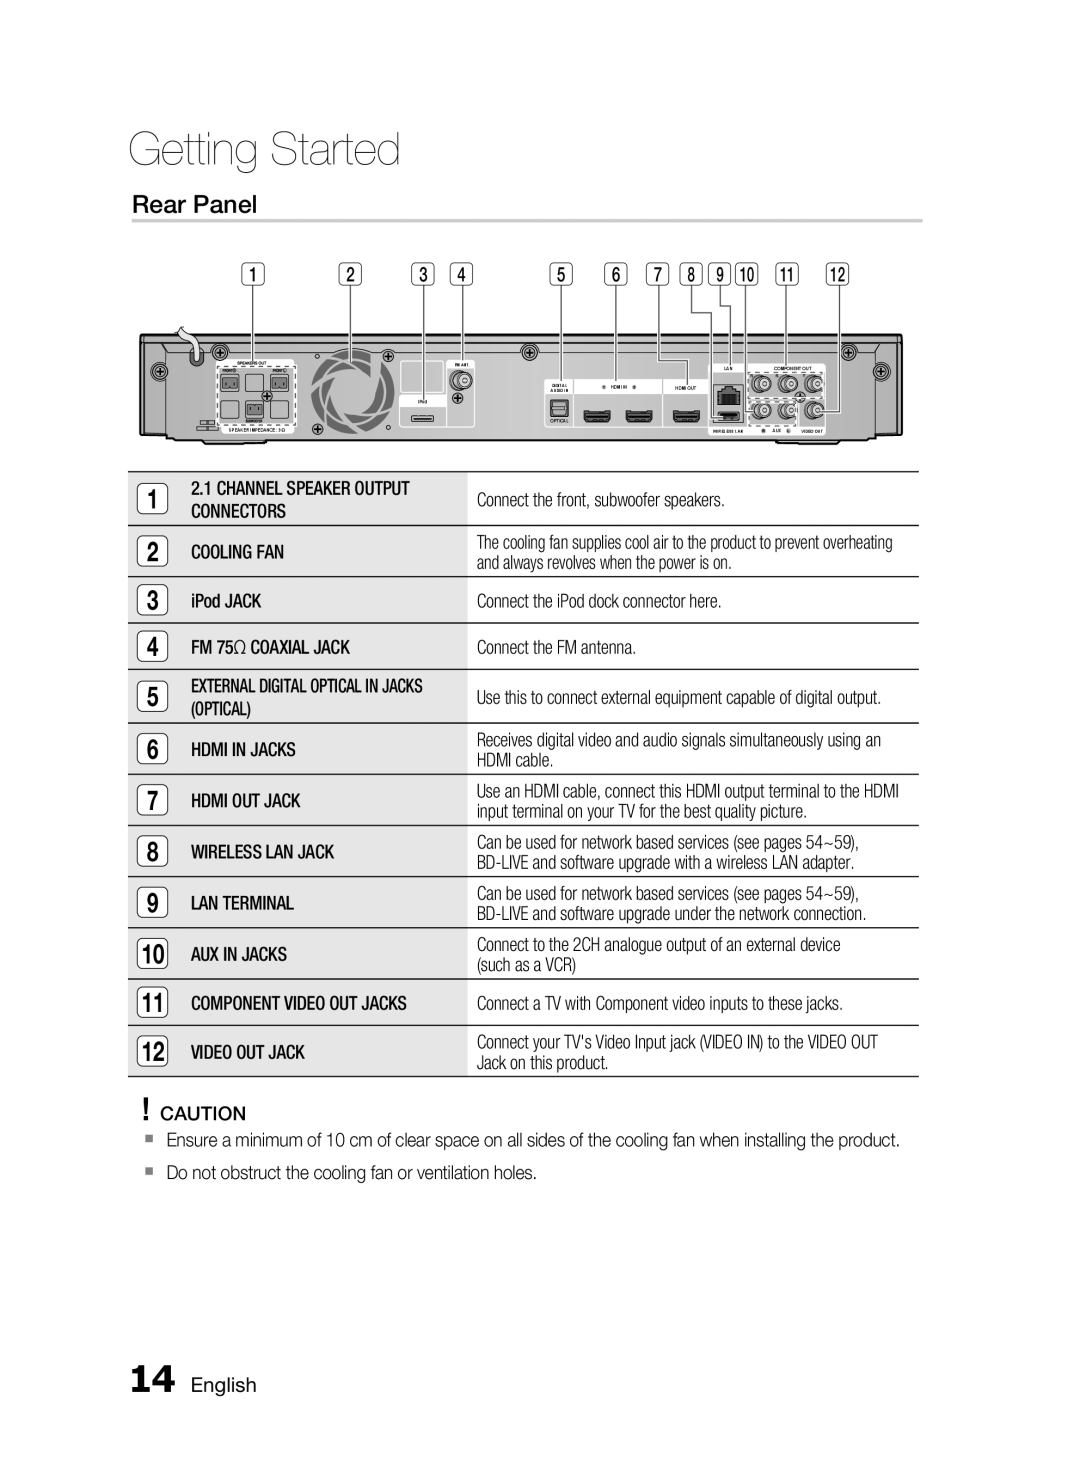 Samsung HT-C5200 user manual Rear Panel, Getting Started 